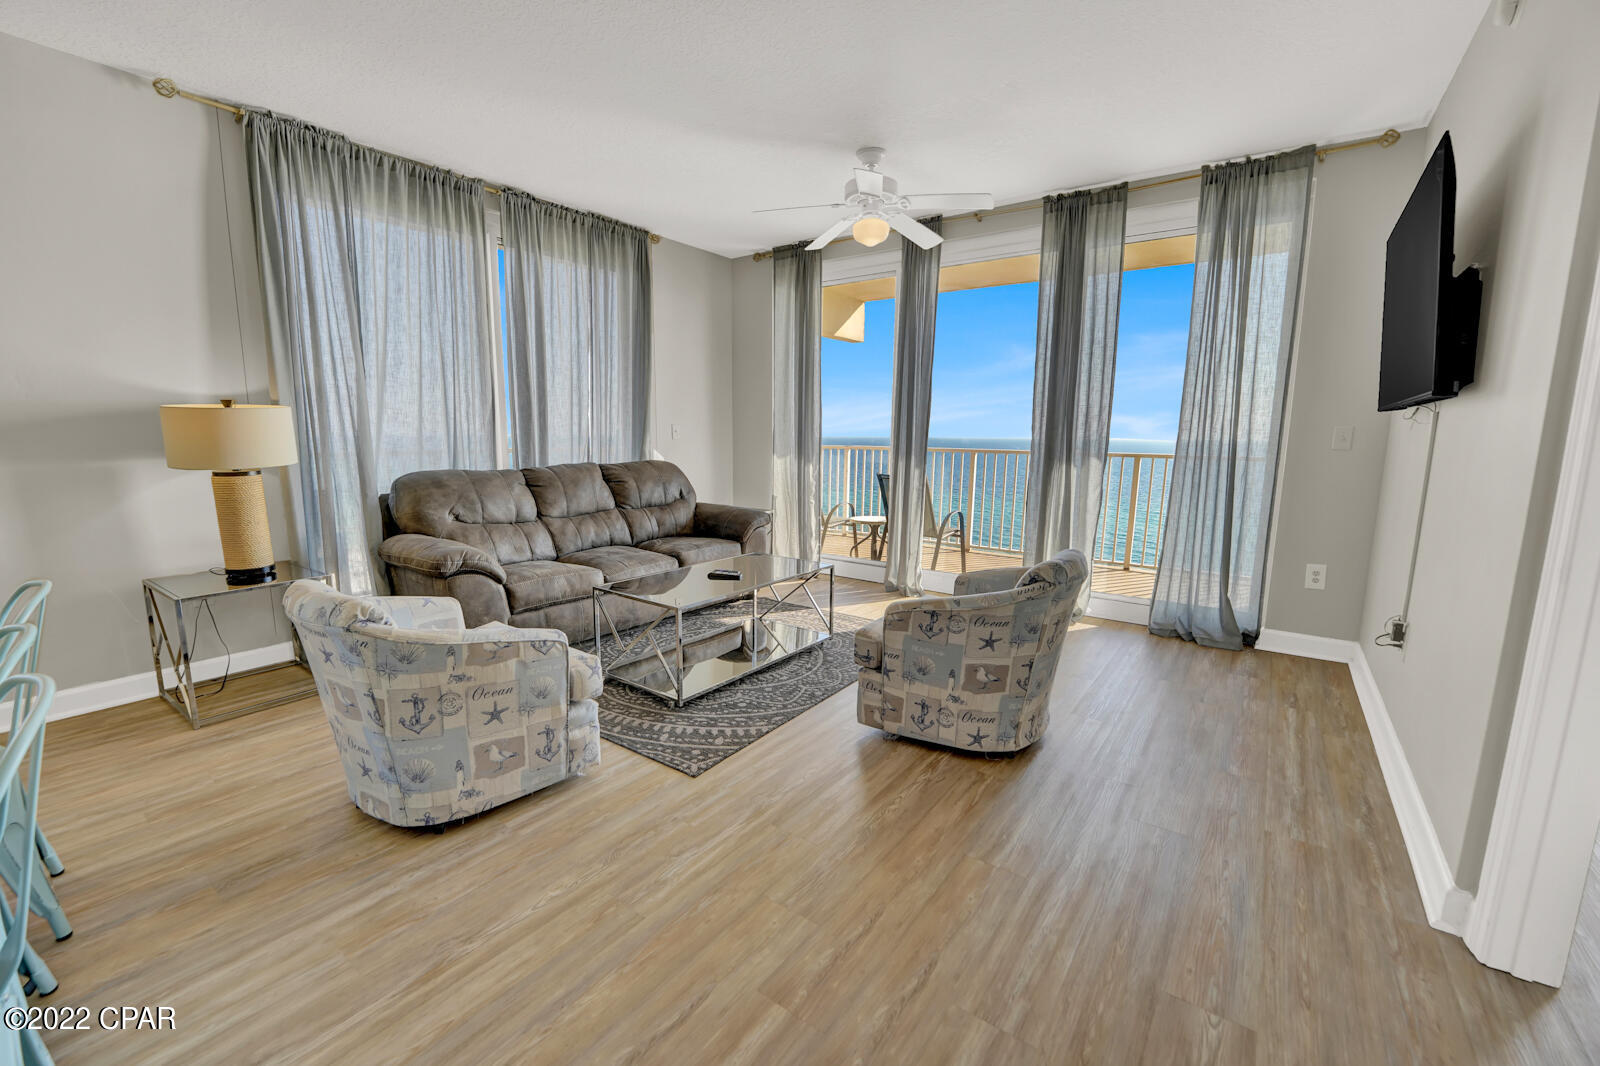 BEAUTIFUL 3BR/3BATH LOOKING OVER THE GULF WITH WRAPPED BALCONY AND PANORAMIC VIEWS OF BOTH SUNRISE AND SUNSET!!! The ''U'' floor plan offers great privacy as it faces eastward, away from the pool and other amenities which most guests and owners do enjoy at times. It also has same level parking. This premium unit generates great income and is the perfect fit for an investor with a bigger family. In addition to that, the unit has been recently  refurbished with new furniture in all the bedrooms and living room, new LVP flooring all throughout the rooms, new hanging light fixtures, freshly painted, and the unit comes fully furnished and turnkey ready!! Moreover, the building has an array of amazing amenities, star shaped hot tub, designer pool, gym, pizza, ice/donut shop, spa, & beach access.